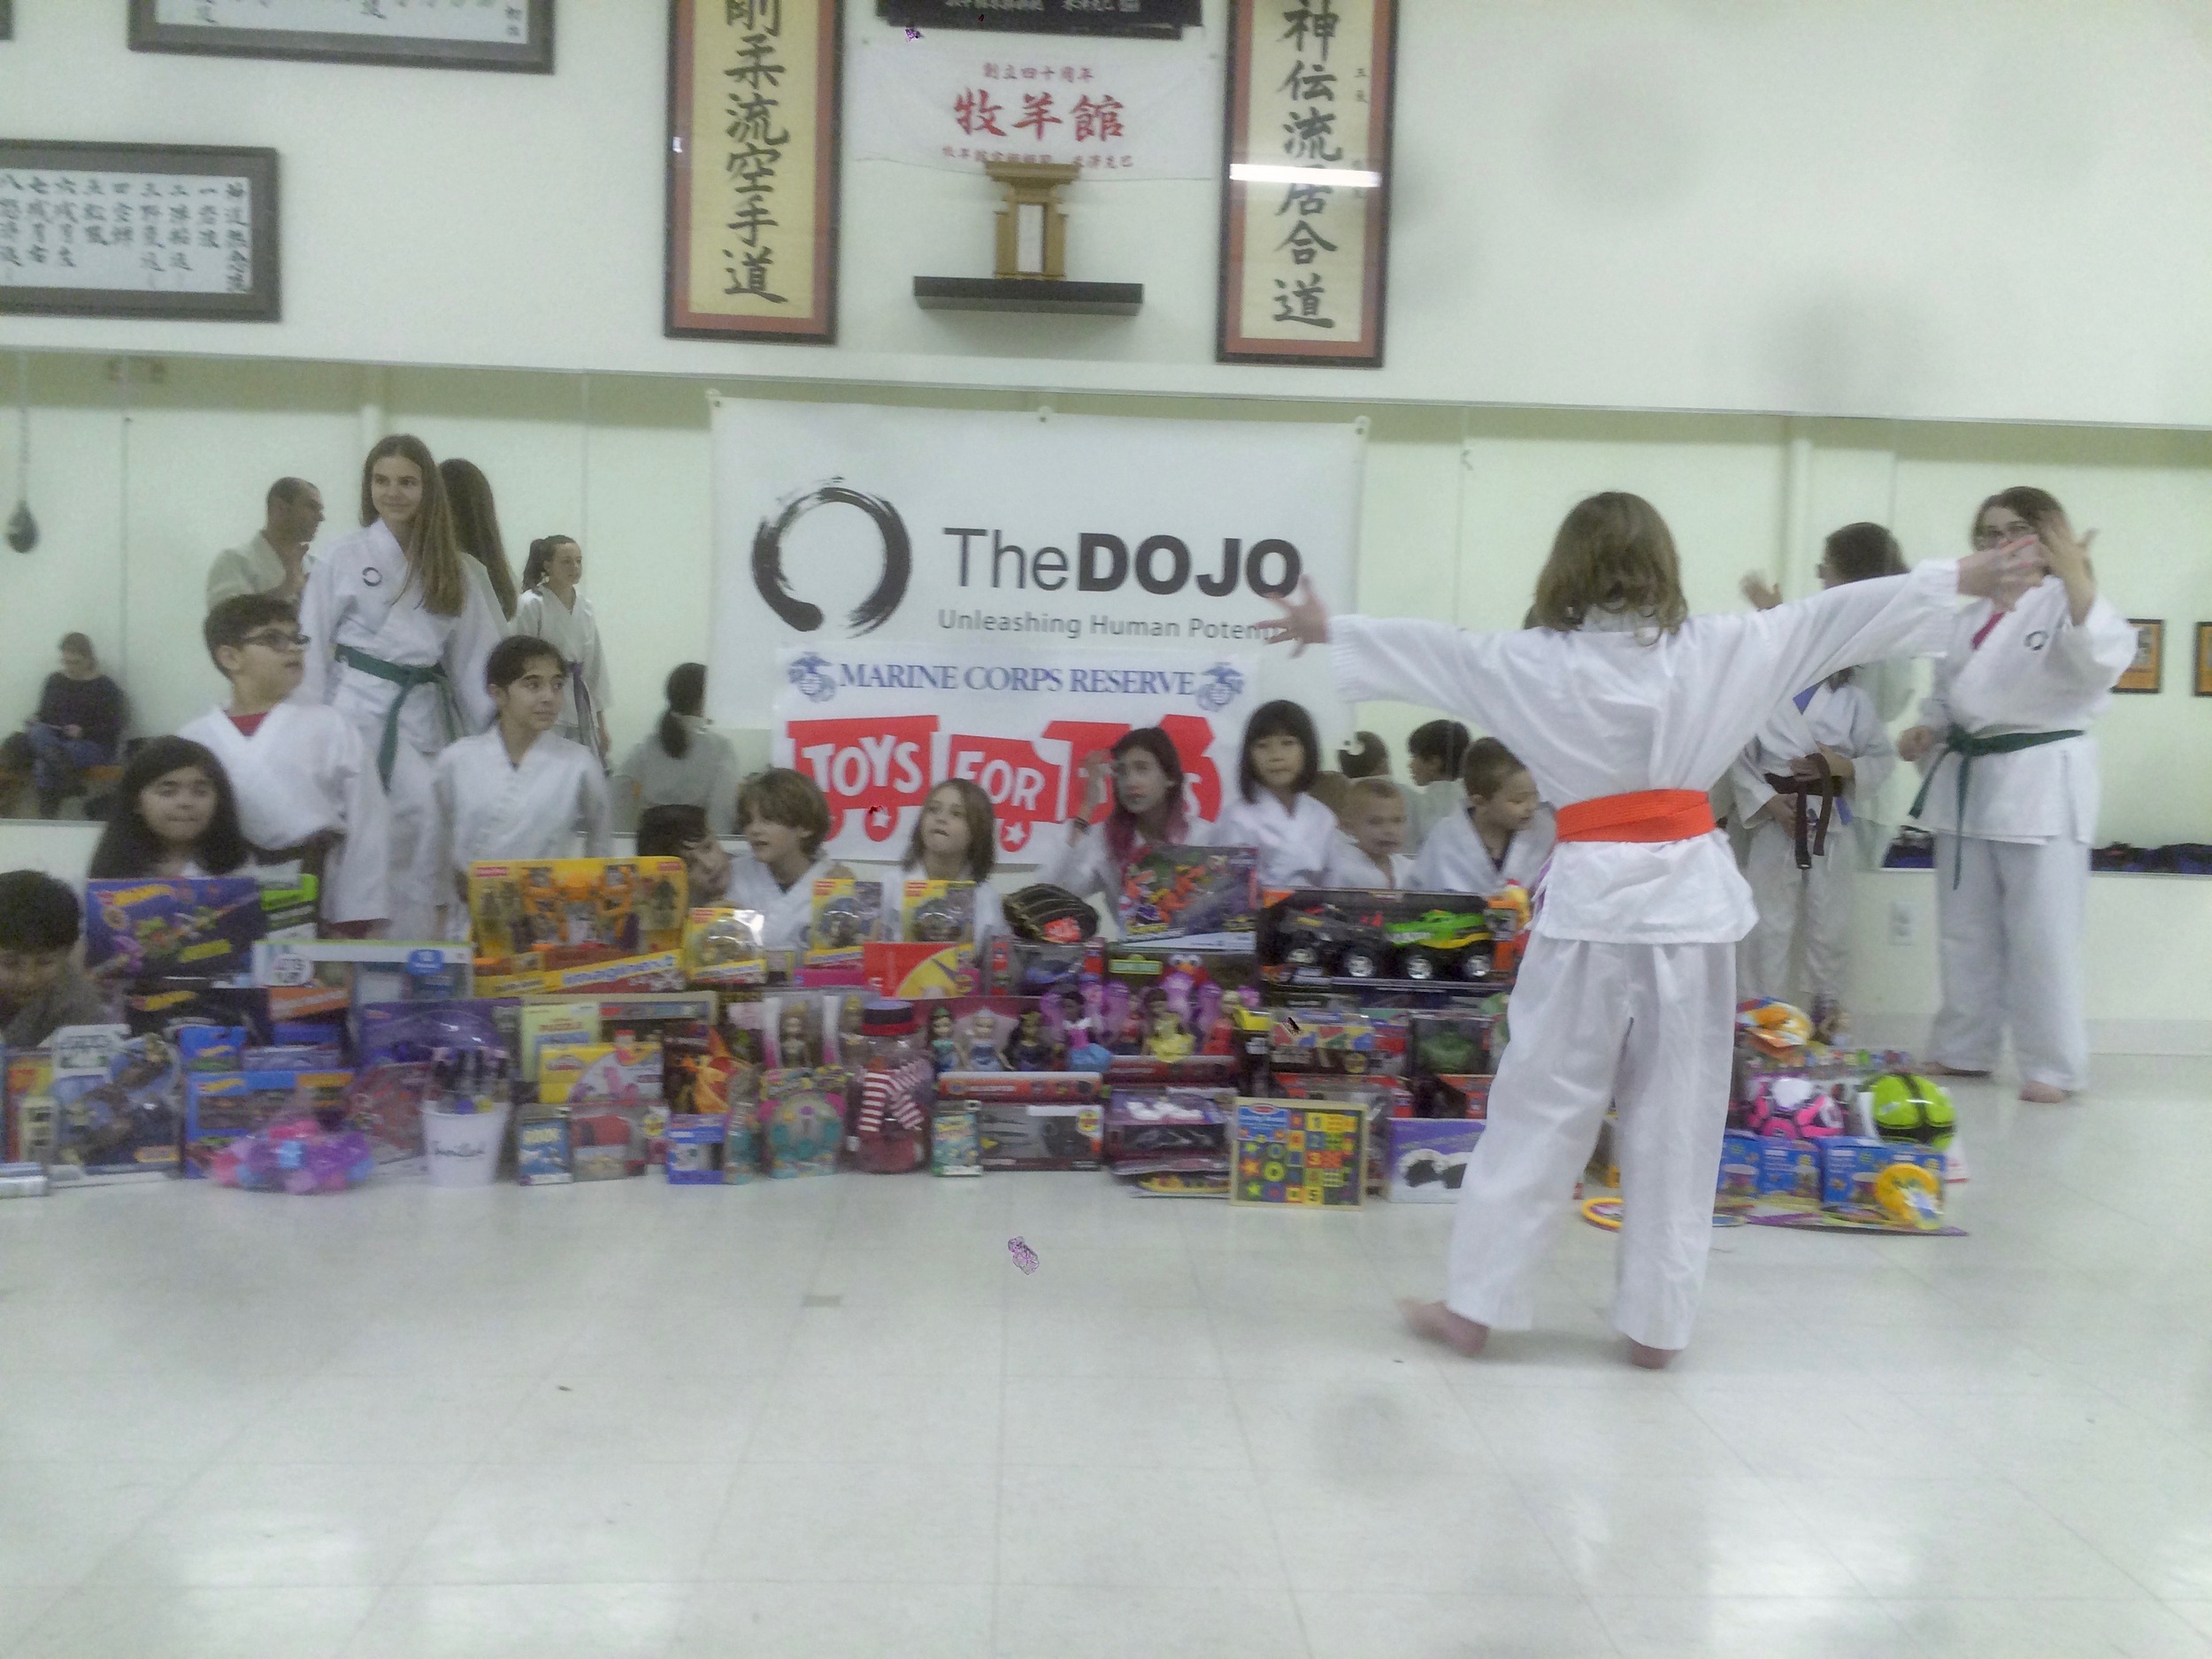 toys-for-tots---thedojo-toy-drive_23803716016_o.jpg